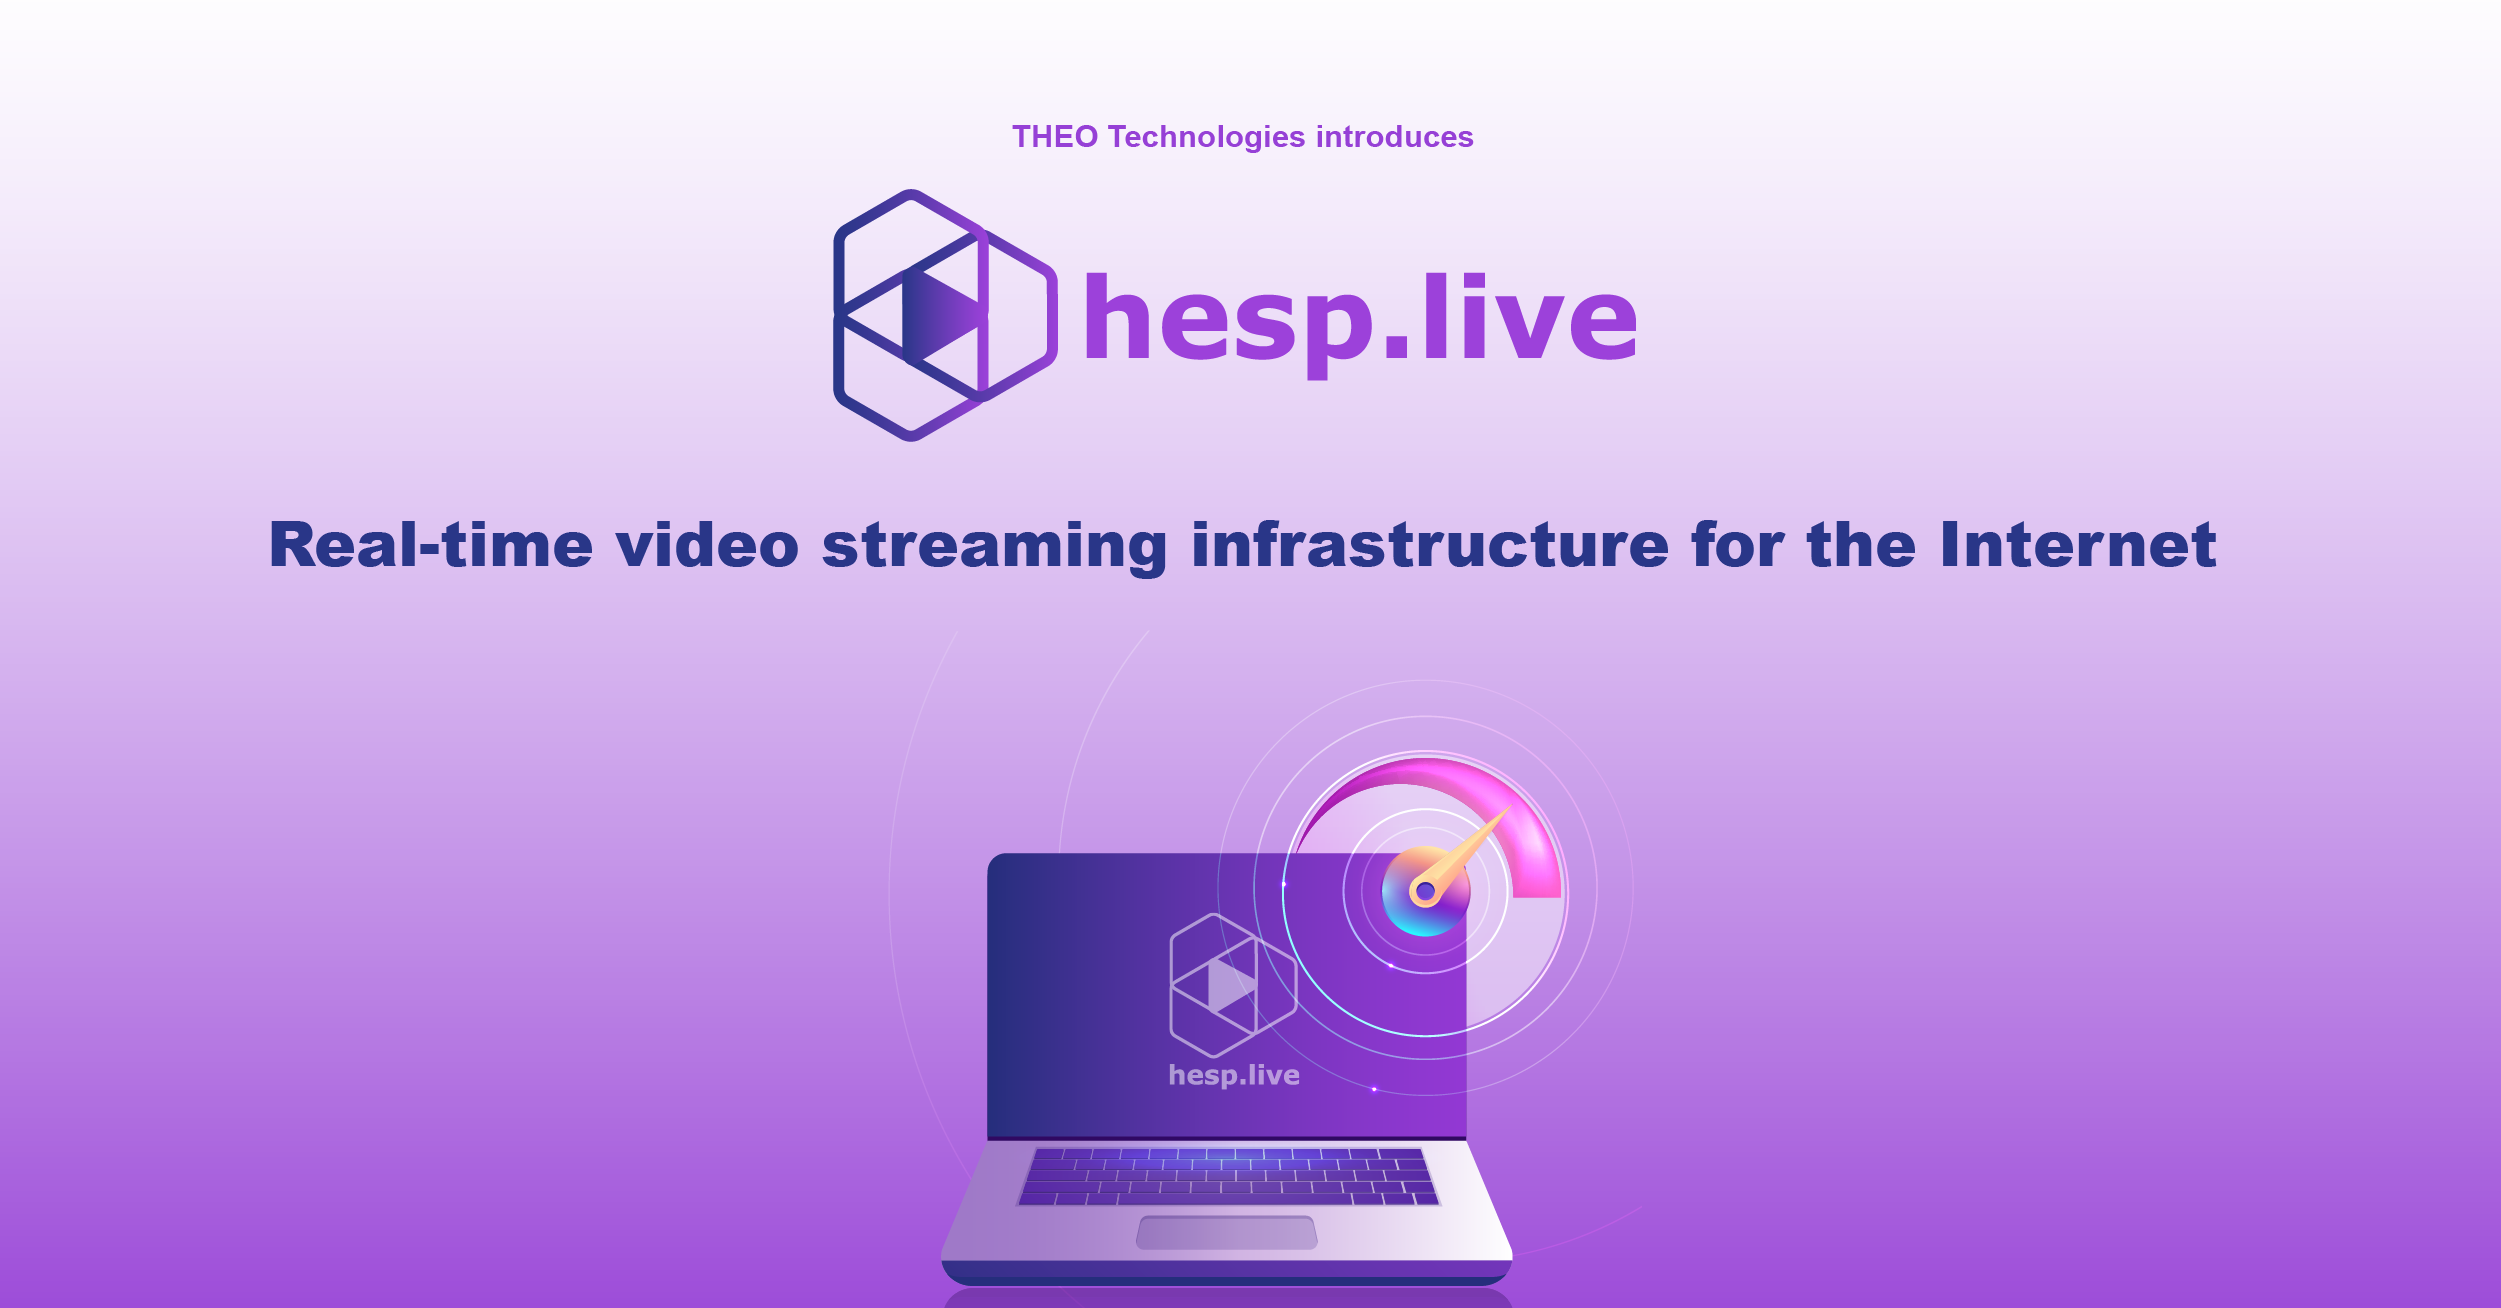 hesp.live is the first HTTP-based real-time video API at scale